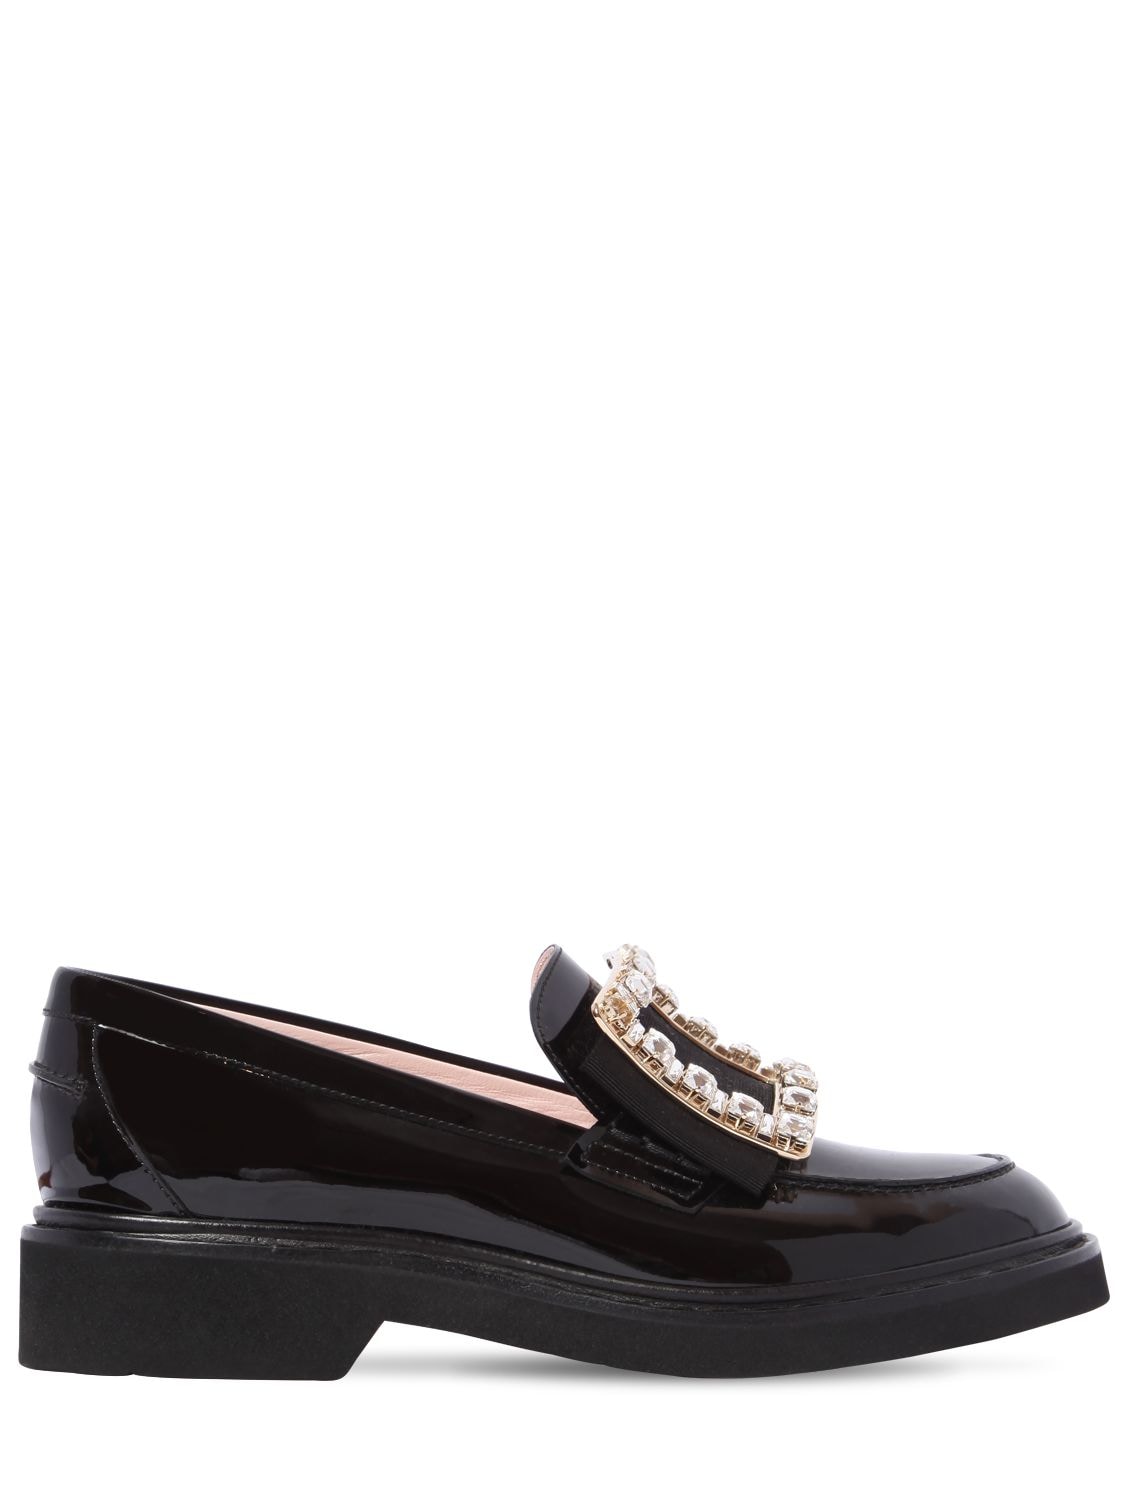 Image of 30mm Viv Rangers Patent Leather Loafers